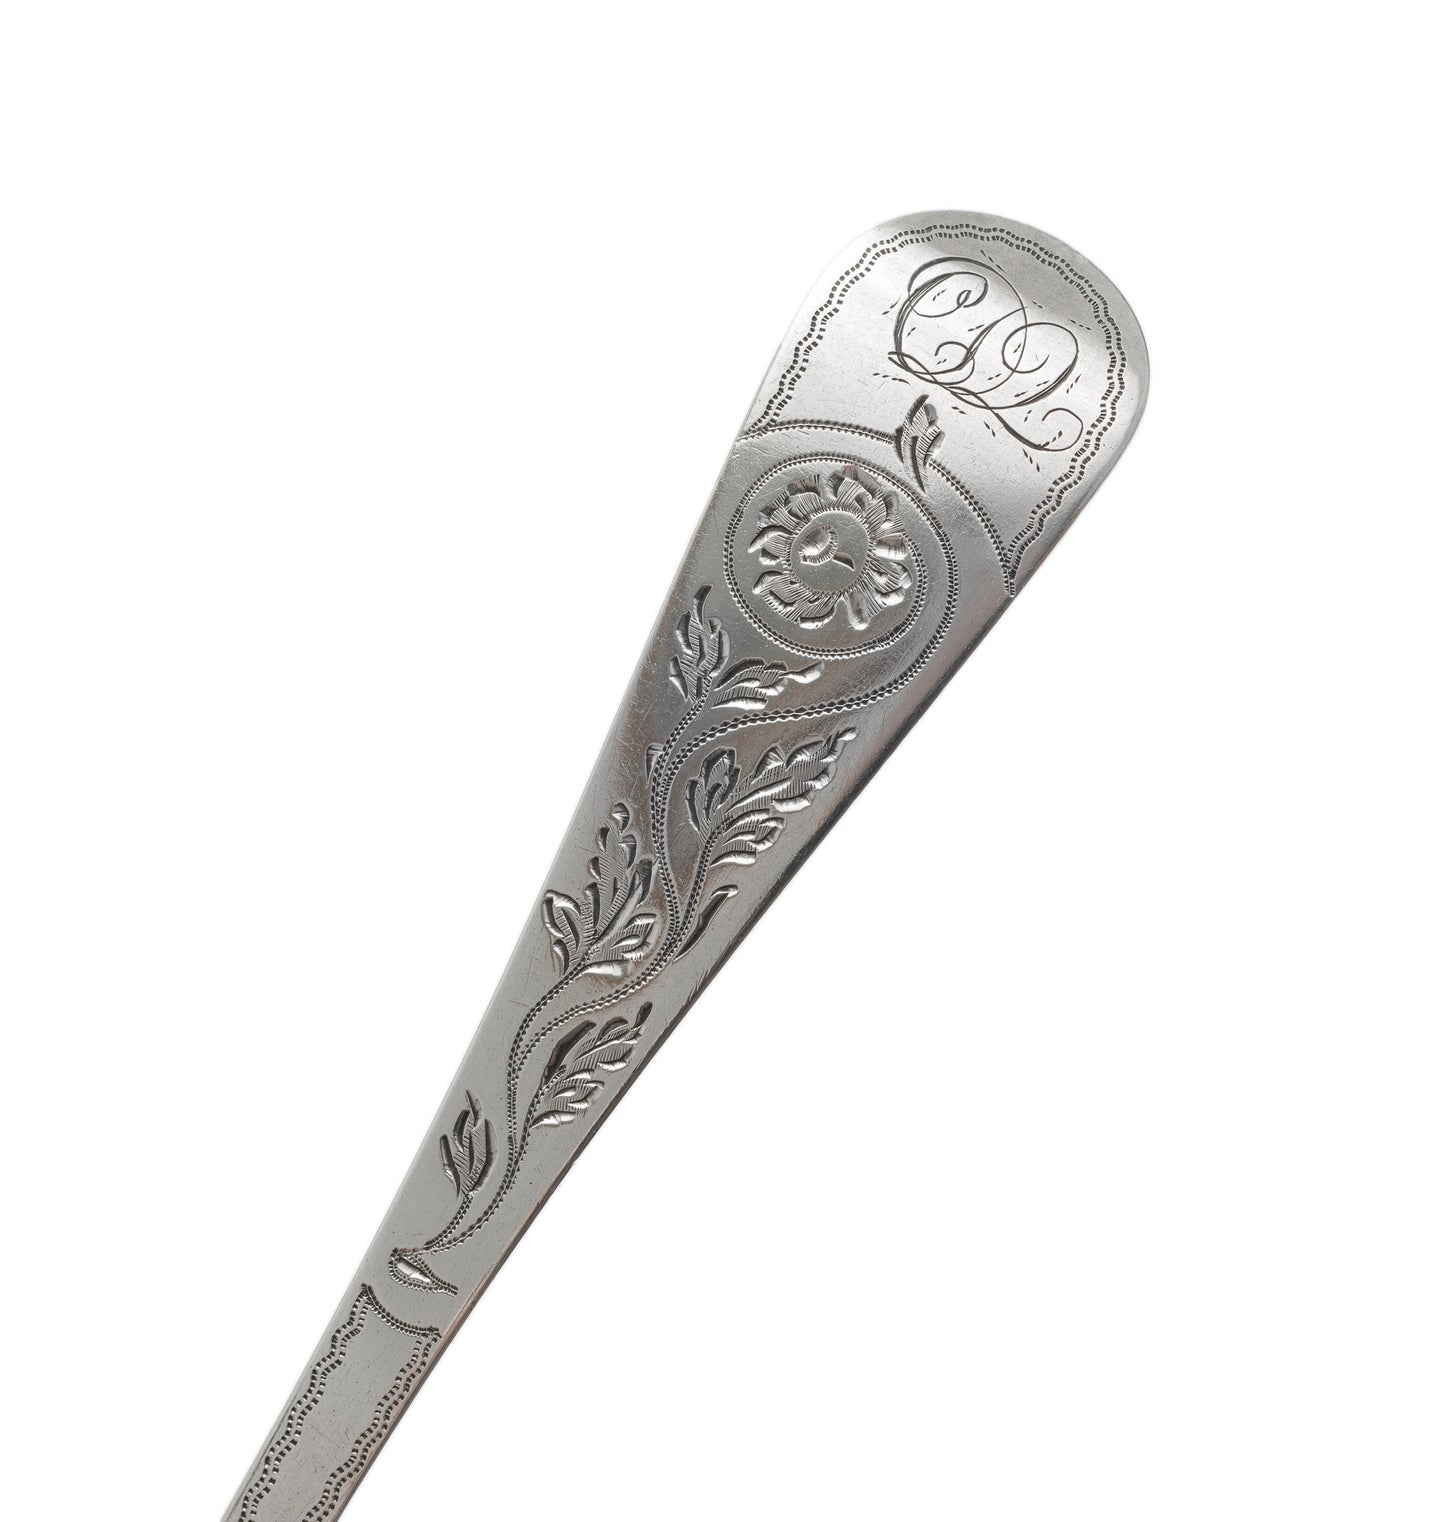 Large Silver Serving Spoon by William Eaton - Antique Victorian - London 1840 (Code 2214)